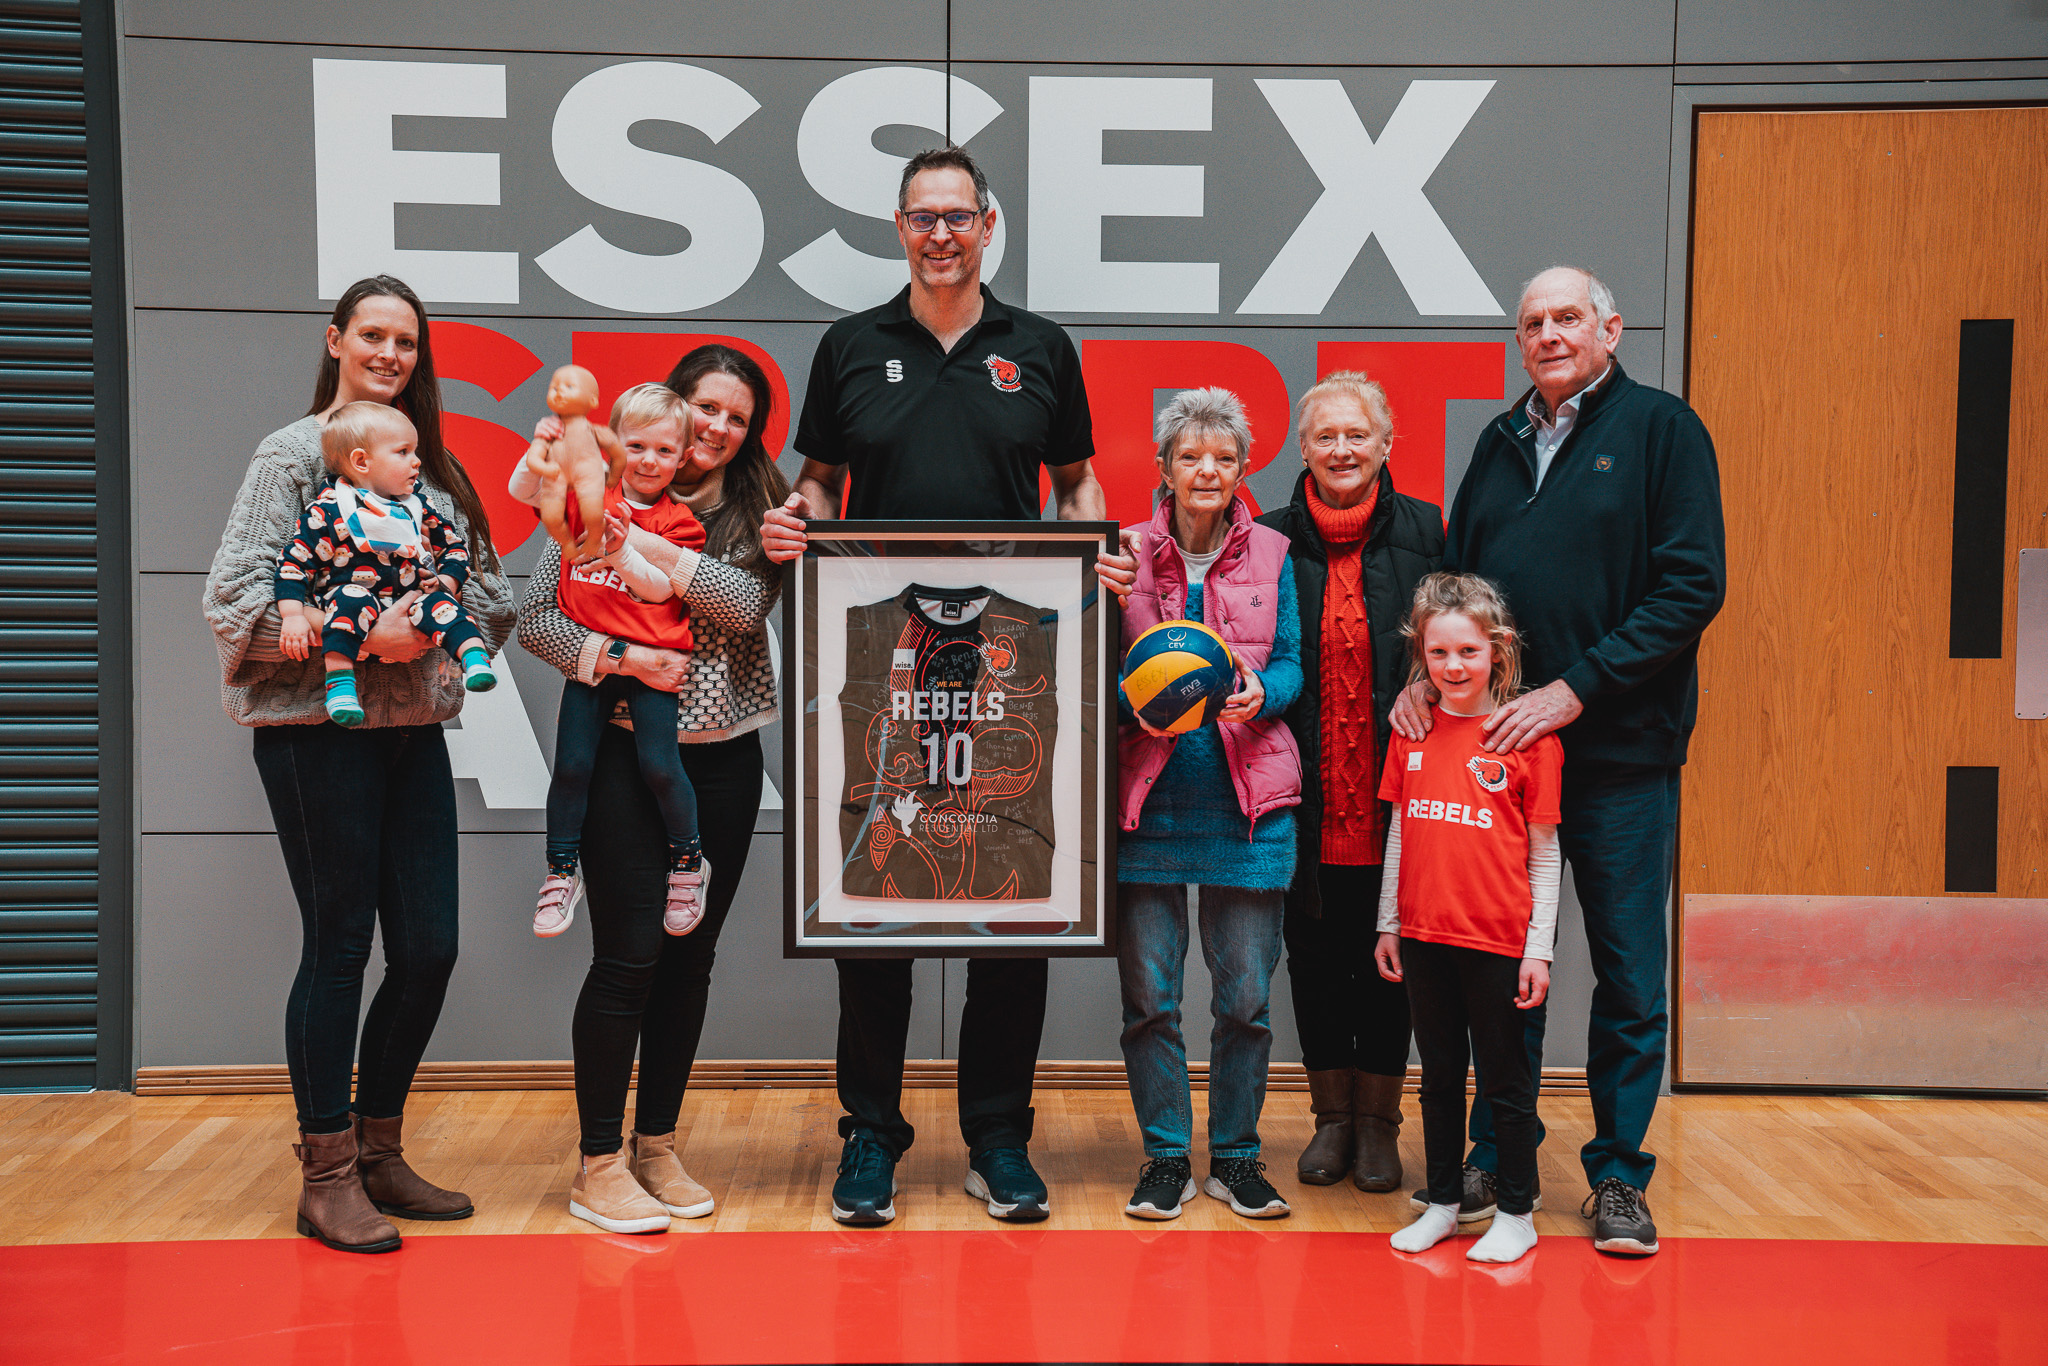 coach Alex Porter celebrating 10 years of working at Essex